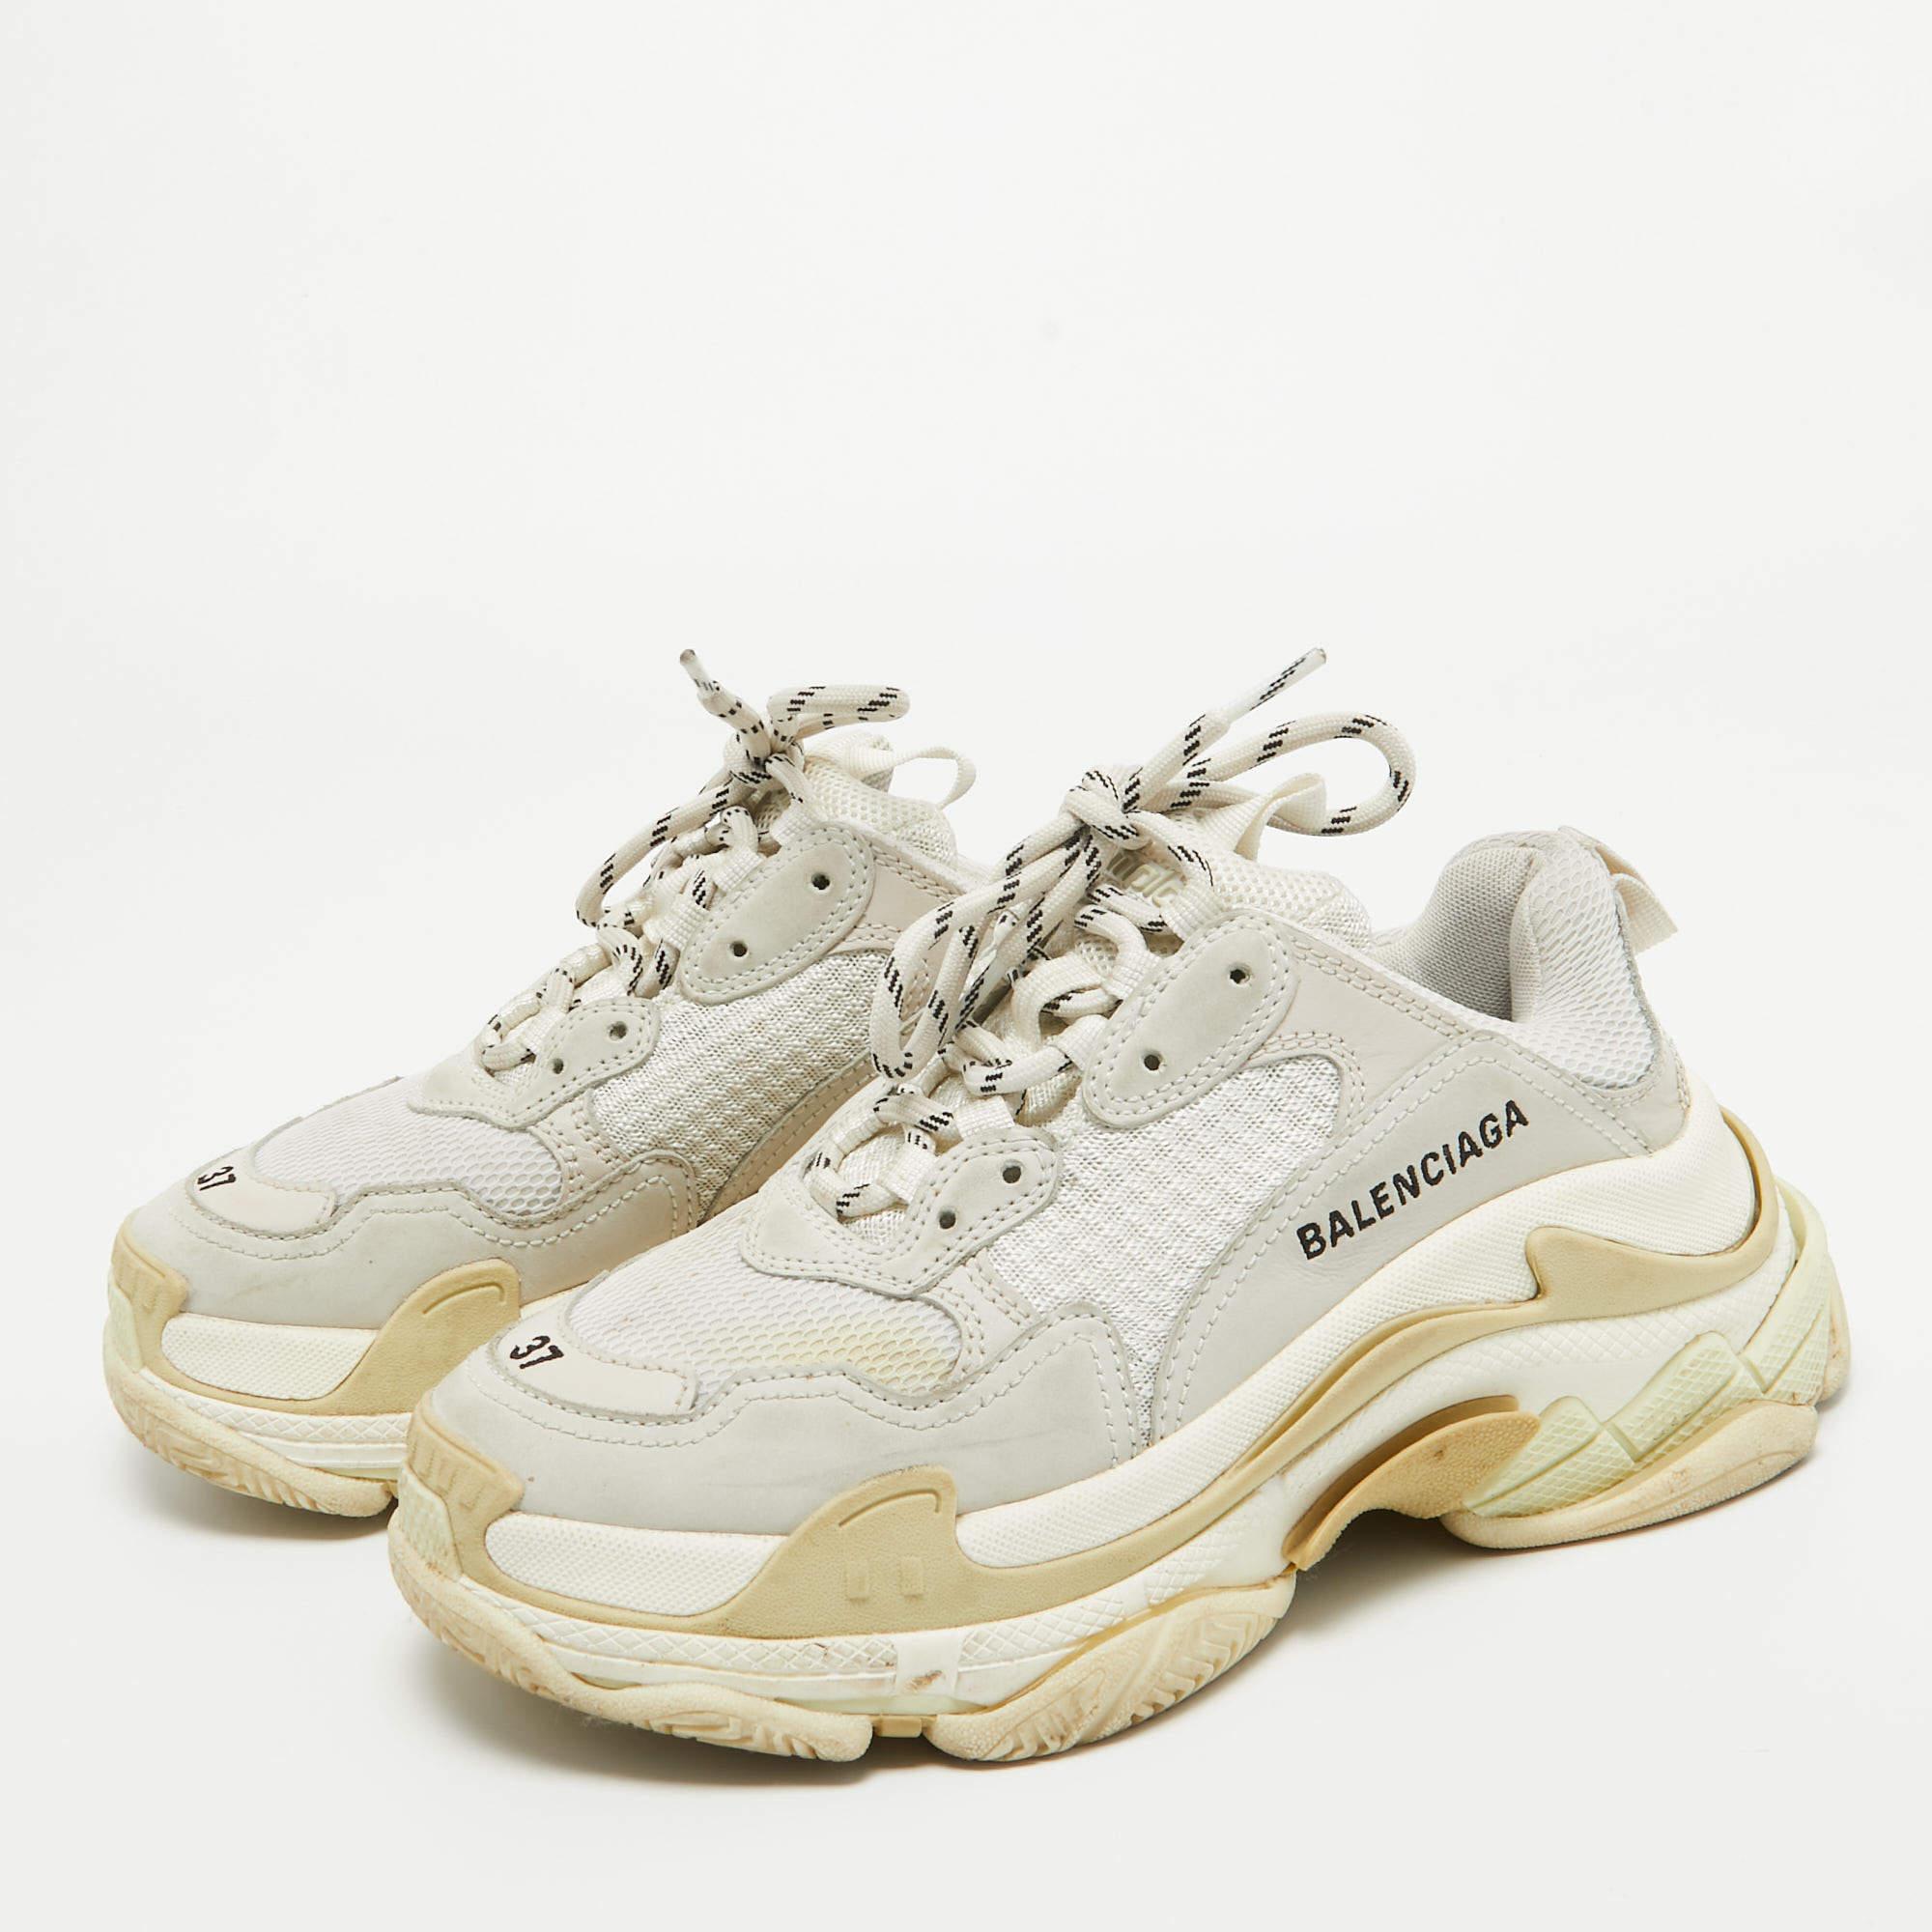 Balenciaga White/Grey Mesh and Leather Triple S Low Top Sneakers Size 37 For Sale 3